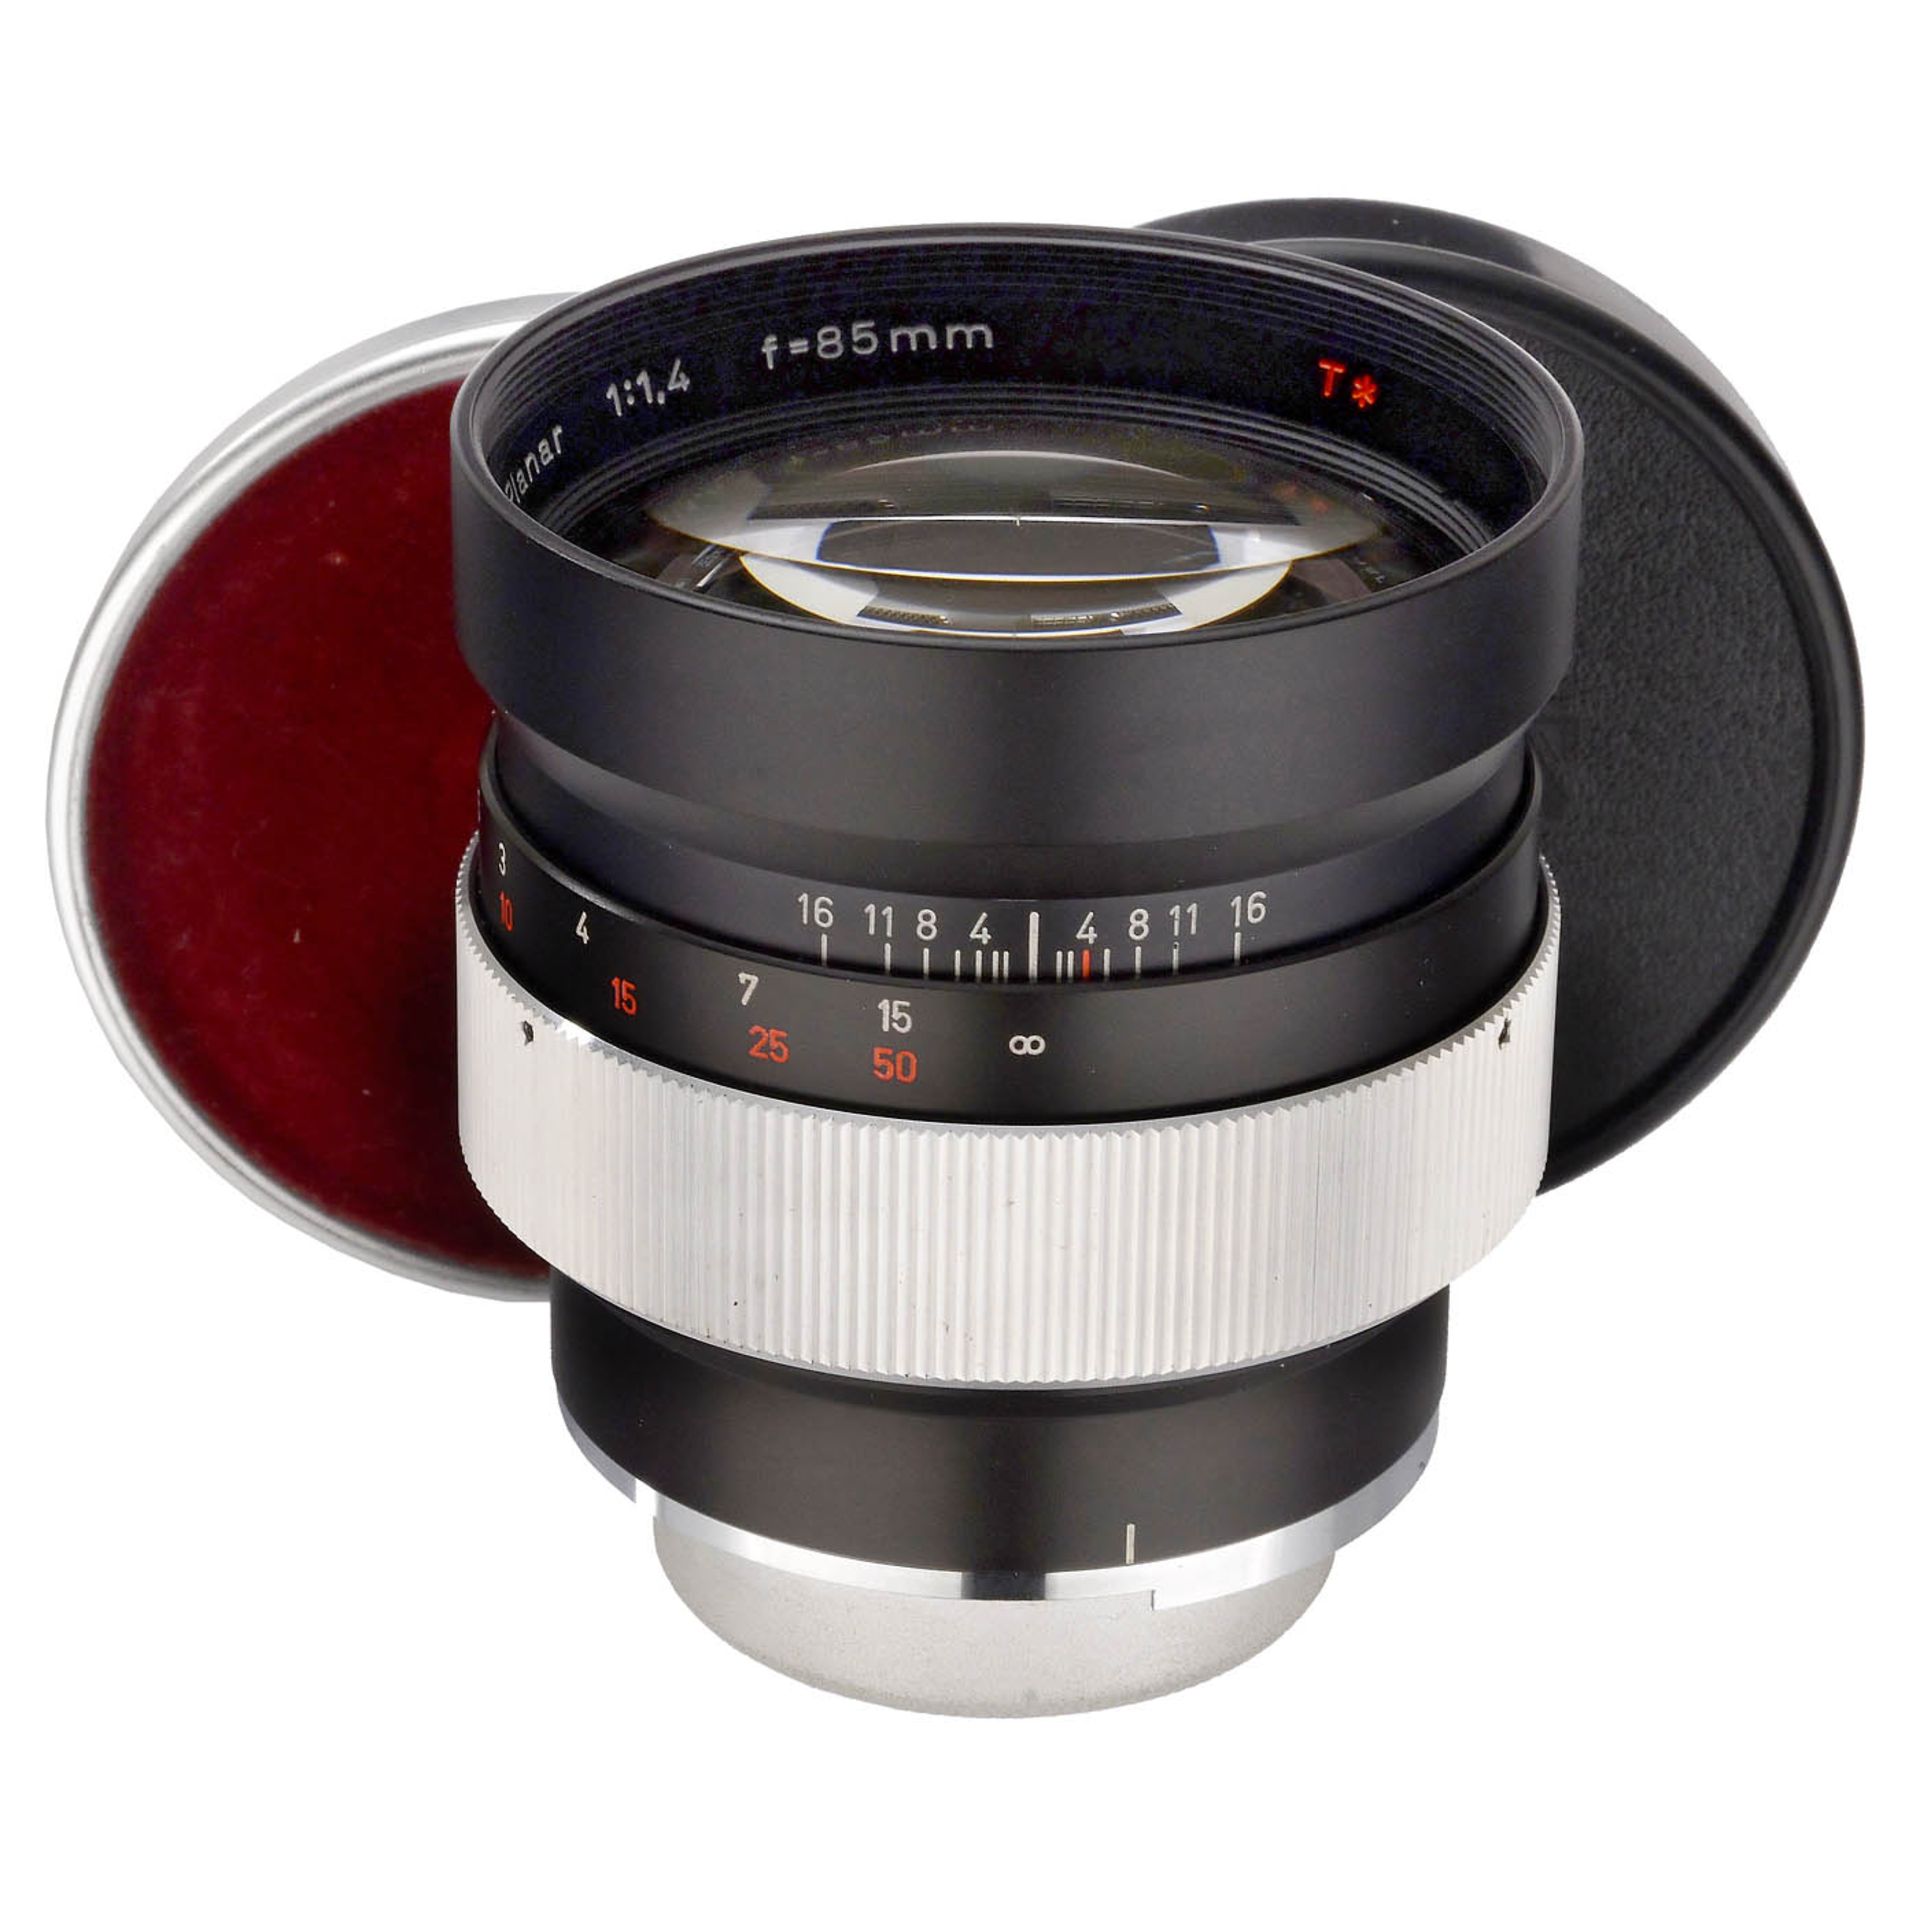 Planar 1.4/85 mm Lens for the Contarex